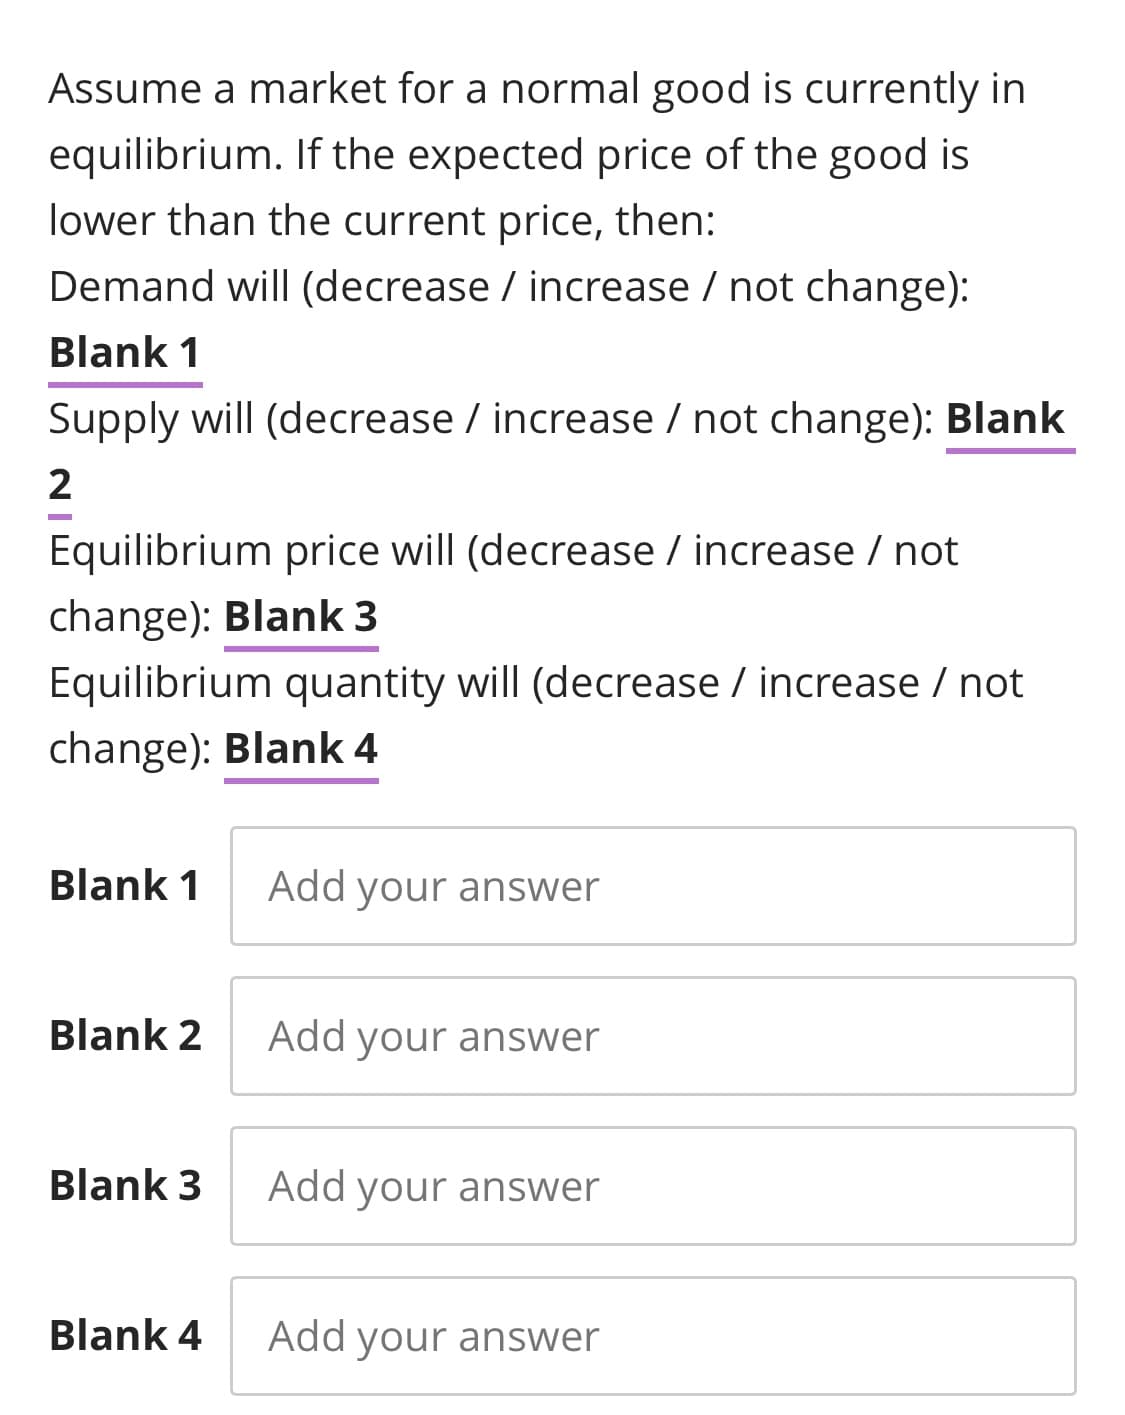 Assume a market for a normal good is currently in
equilibrium. If the expected price of the good is
lower than the current price, then:
Demand will (decrease / increase / not change):
Blank 1
Supply will (decrease / increase / not change): Blank
2
Equilibrium price will (decrease / increase / not
change): Blank 3
Equilibrium quantity will (decrease / increase / not
change): Blank 4
Blank 1
Add your answer
Blank 2
Add your answer
Blank 3
Add your answer
Blank 4
Add your answer
